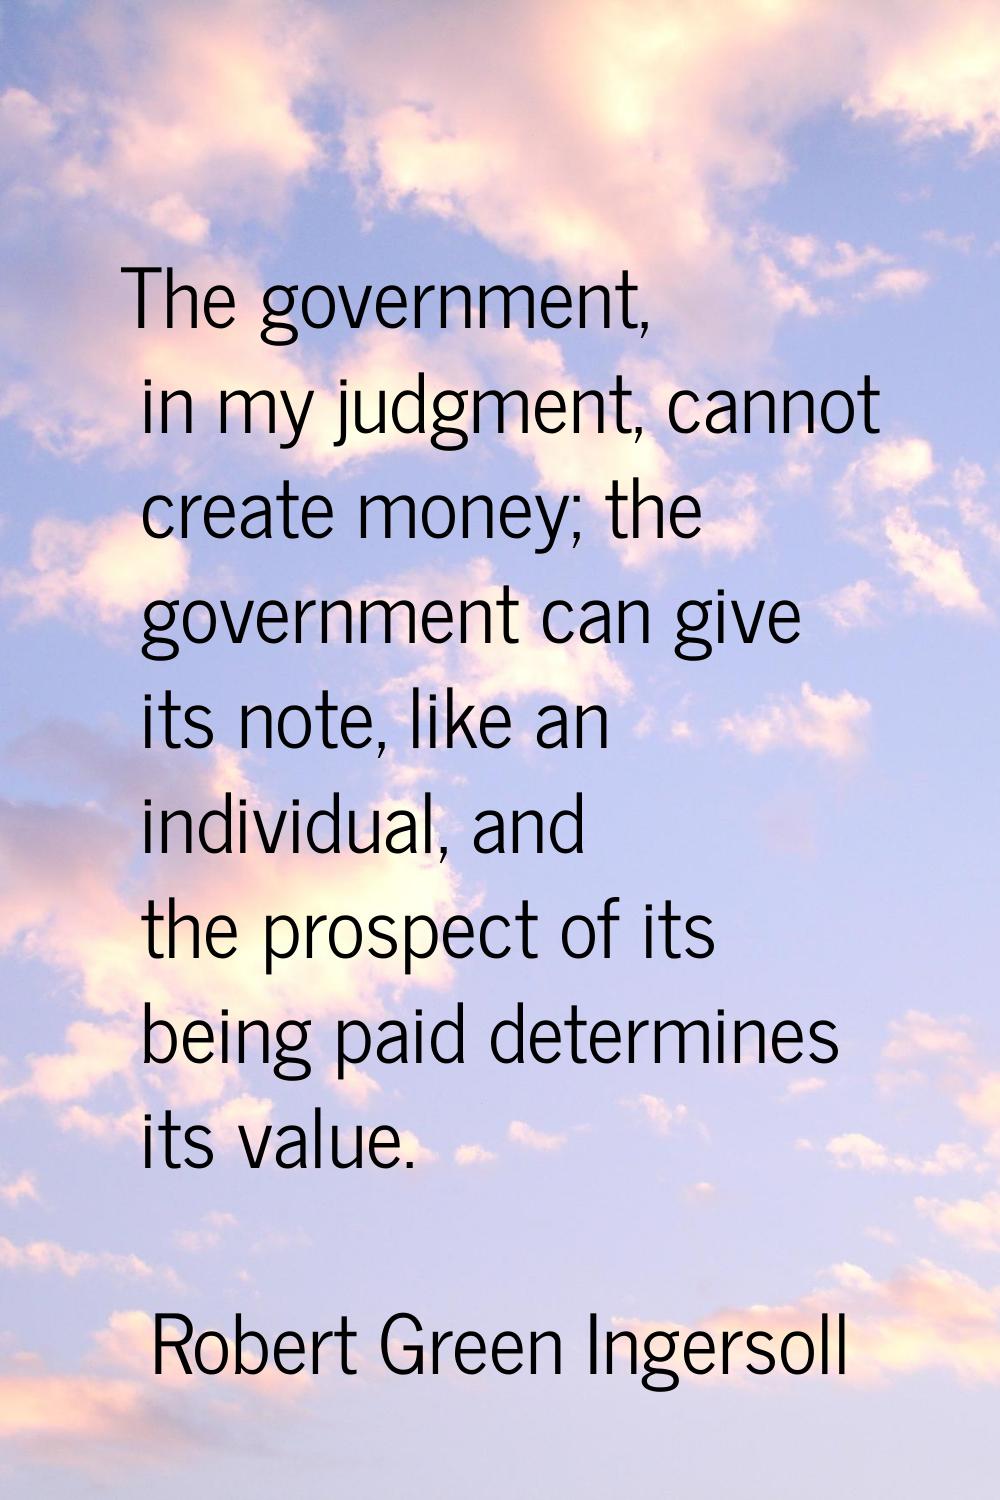 The government, in my judgment, cannot create money; the government can give its note, like an indi